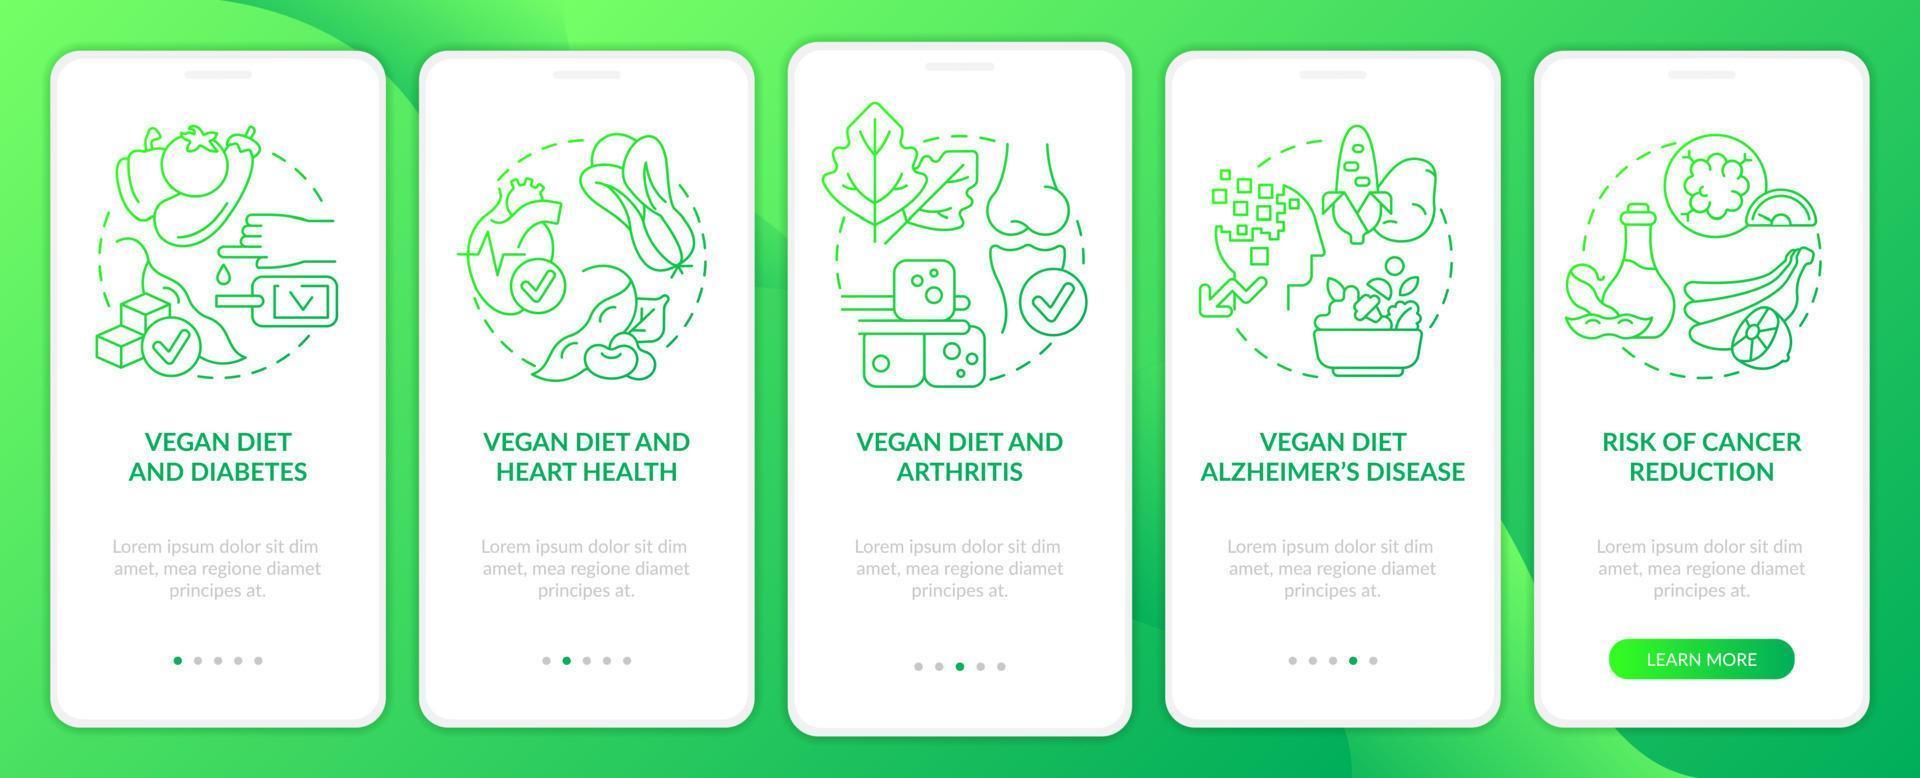 Vegan diet and illnesses green gradient onboarding mobile app screen. Walkthrough 5 steps graphic instructions pages with linear concepts. UI, UX, GUI template. vector